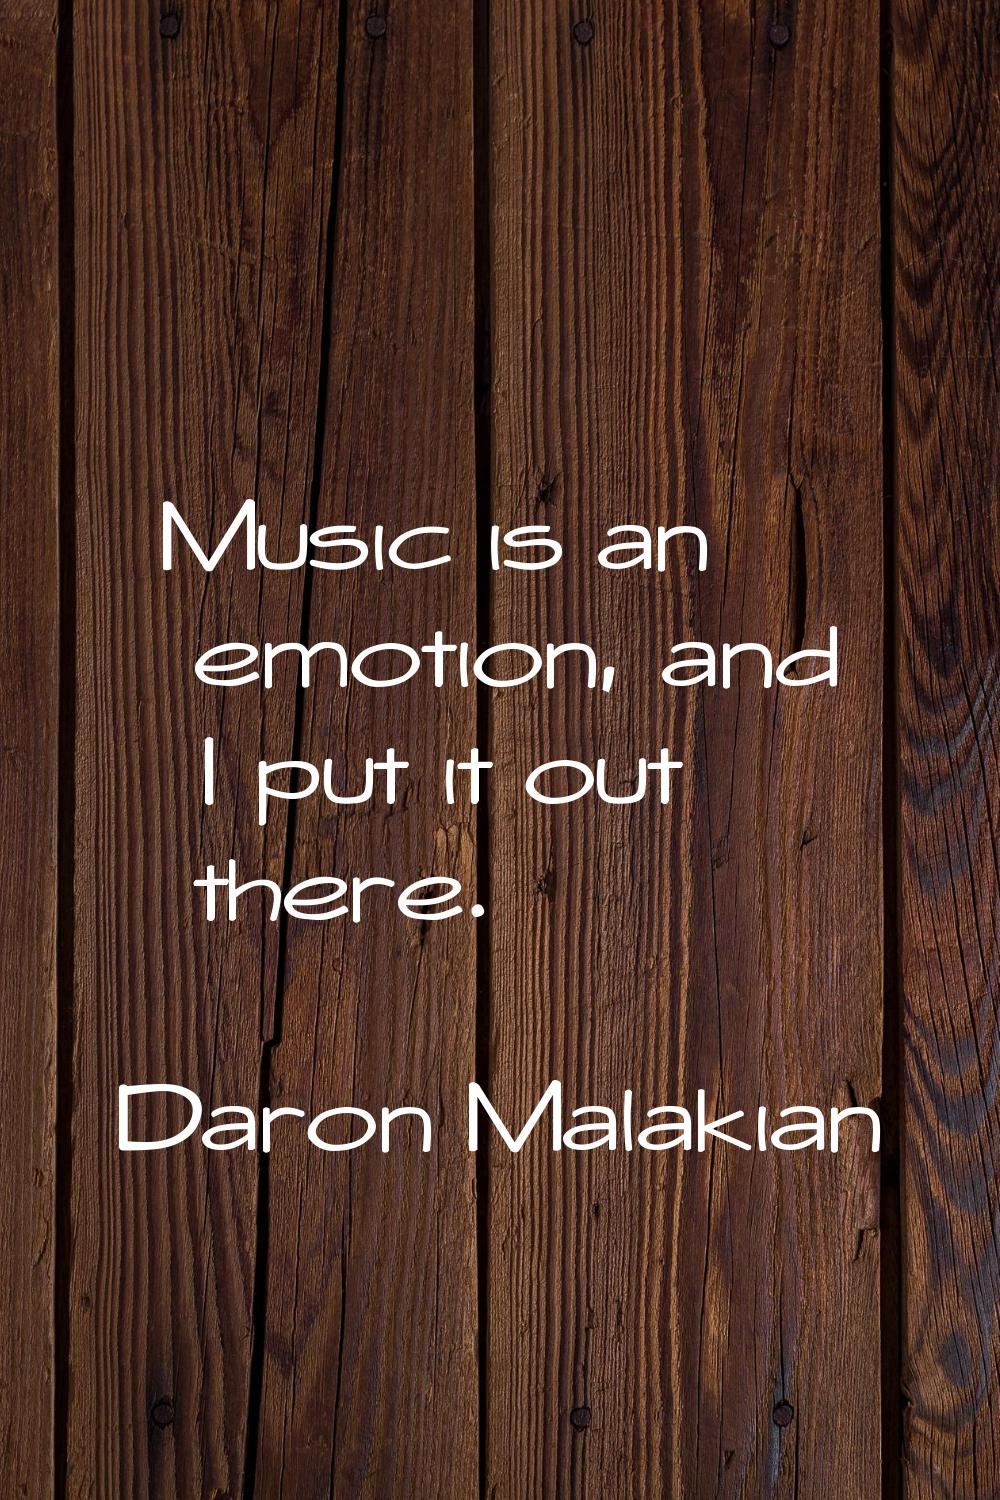 Music is an emotion, and I put it out there.